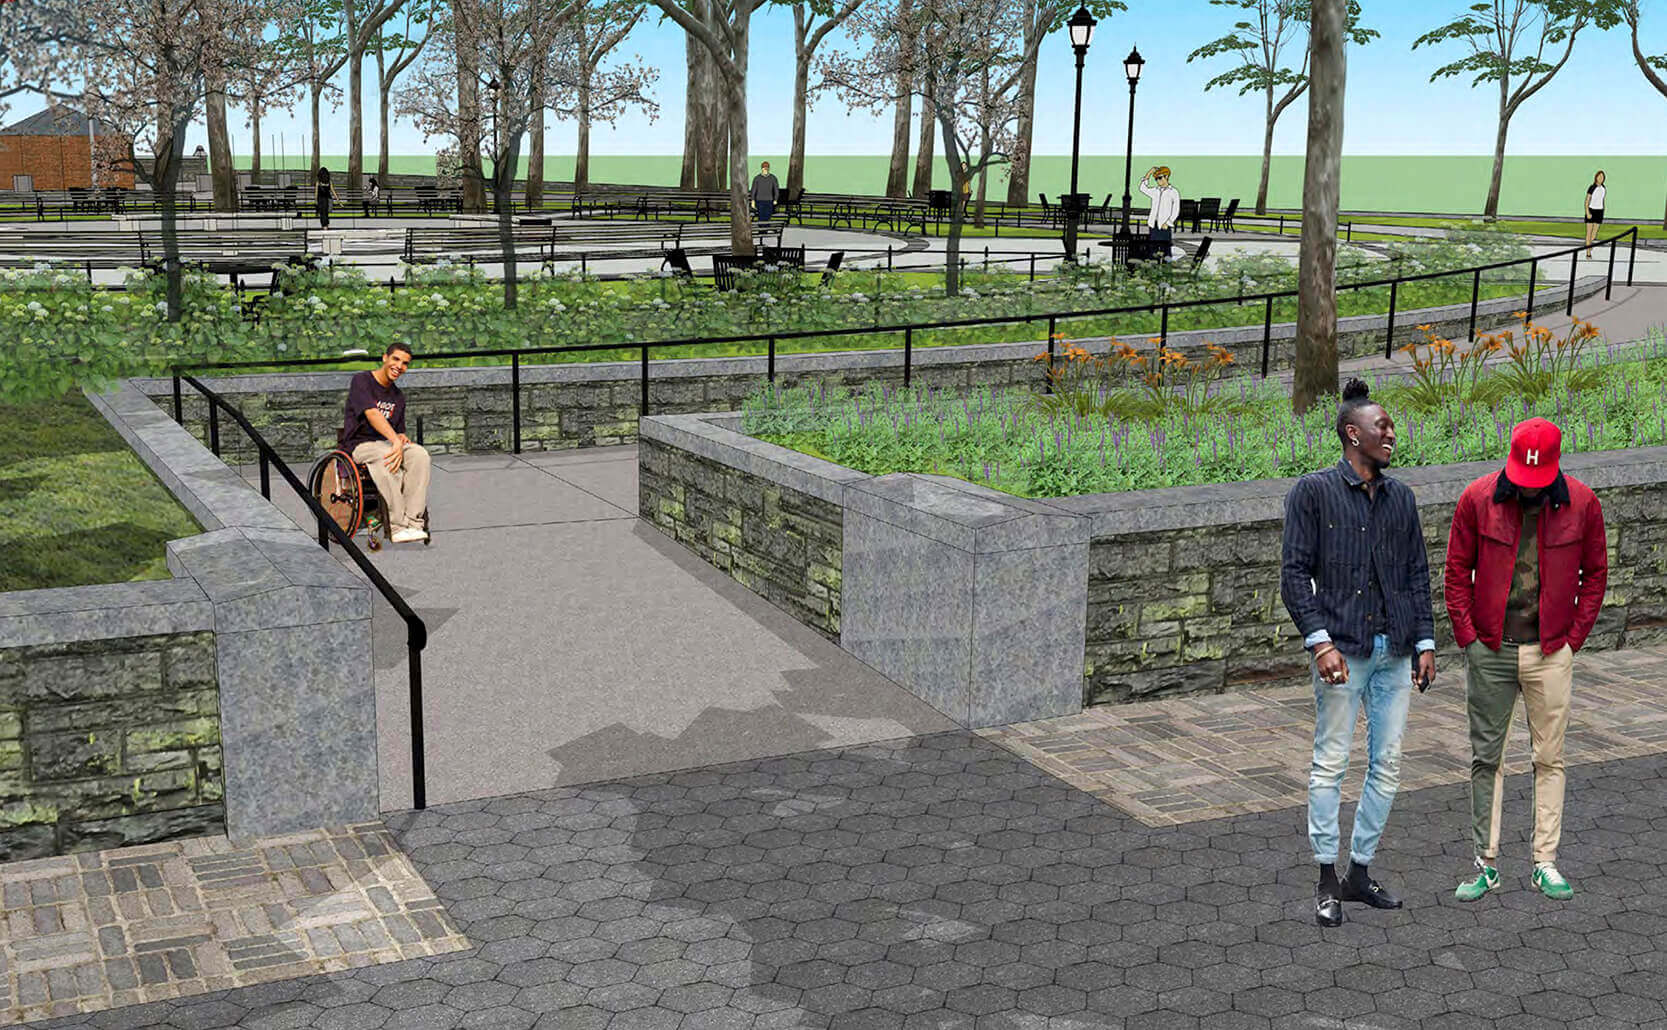 Renderings and plans by NYC Department of Parks & Recreation 